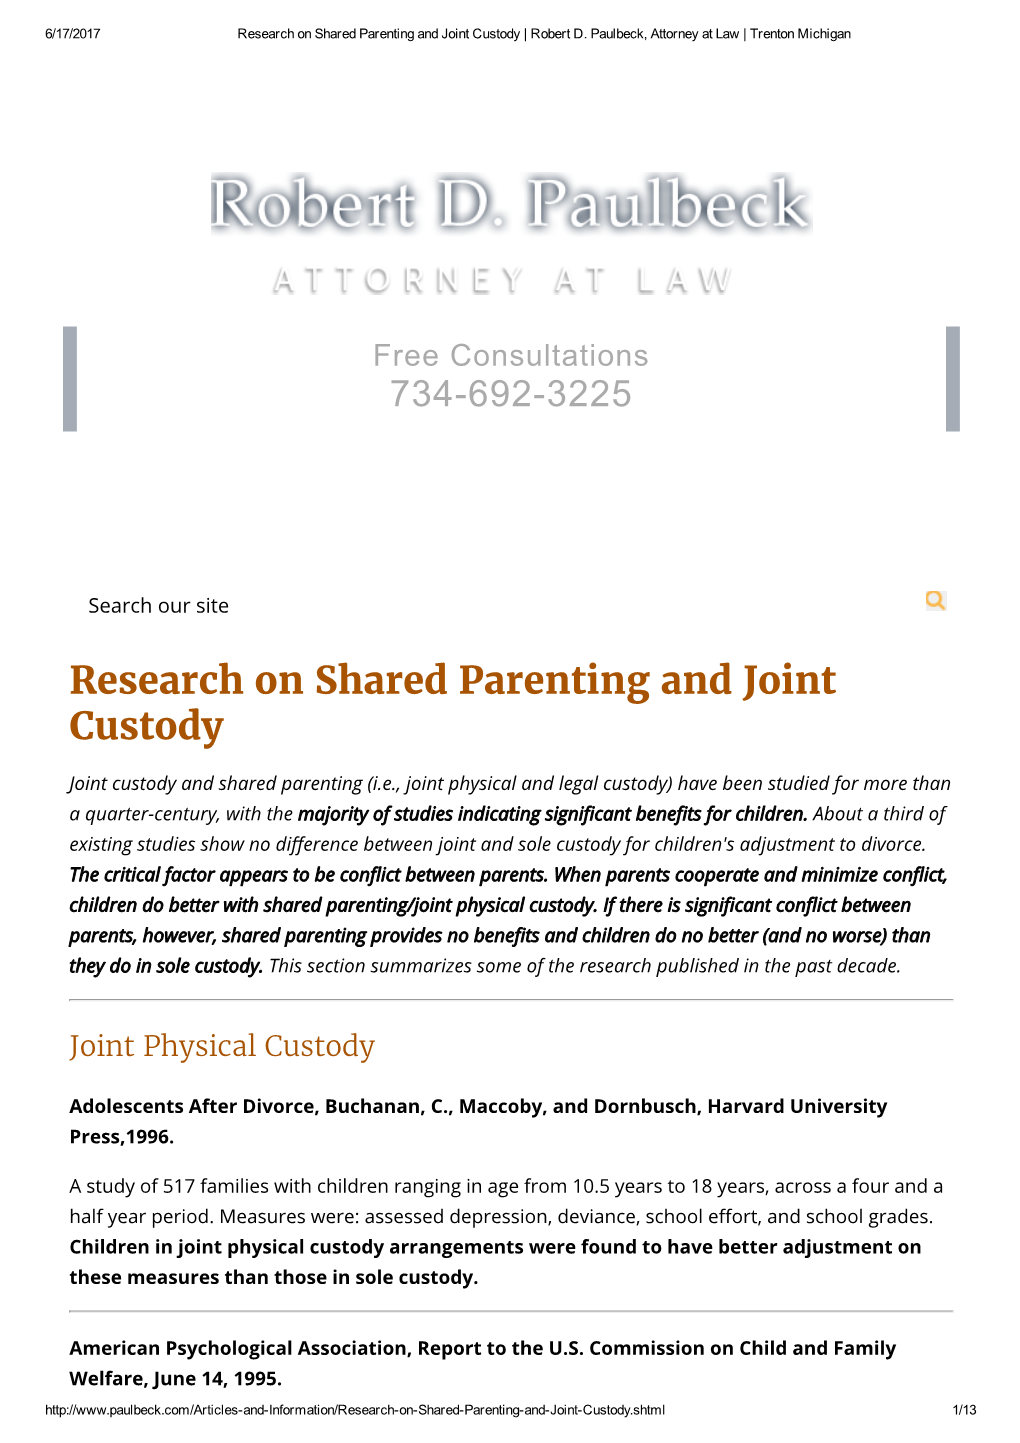 Research on Shared Parenting and Joint Custody | Robert D